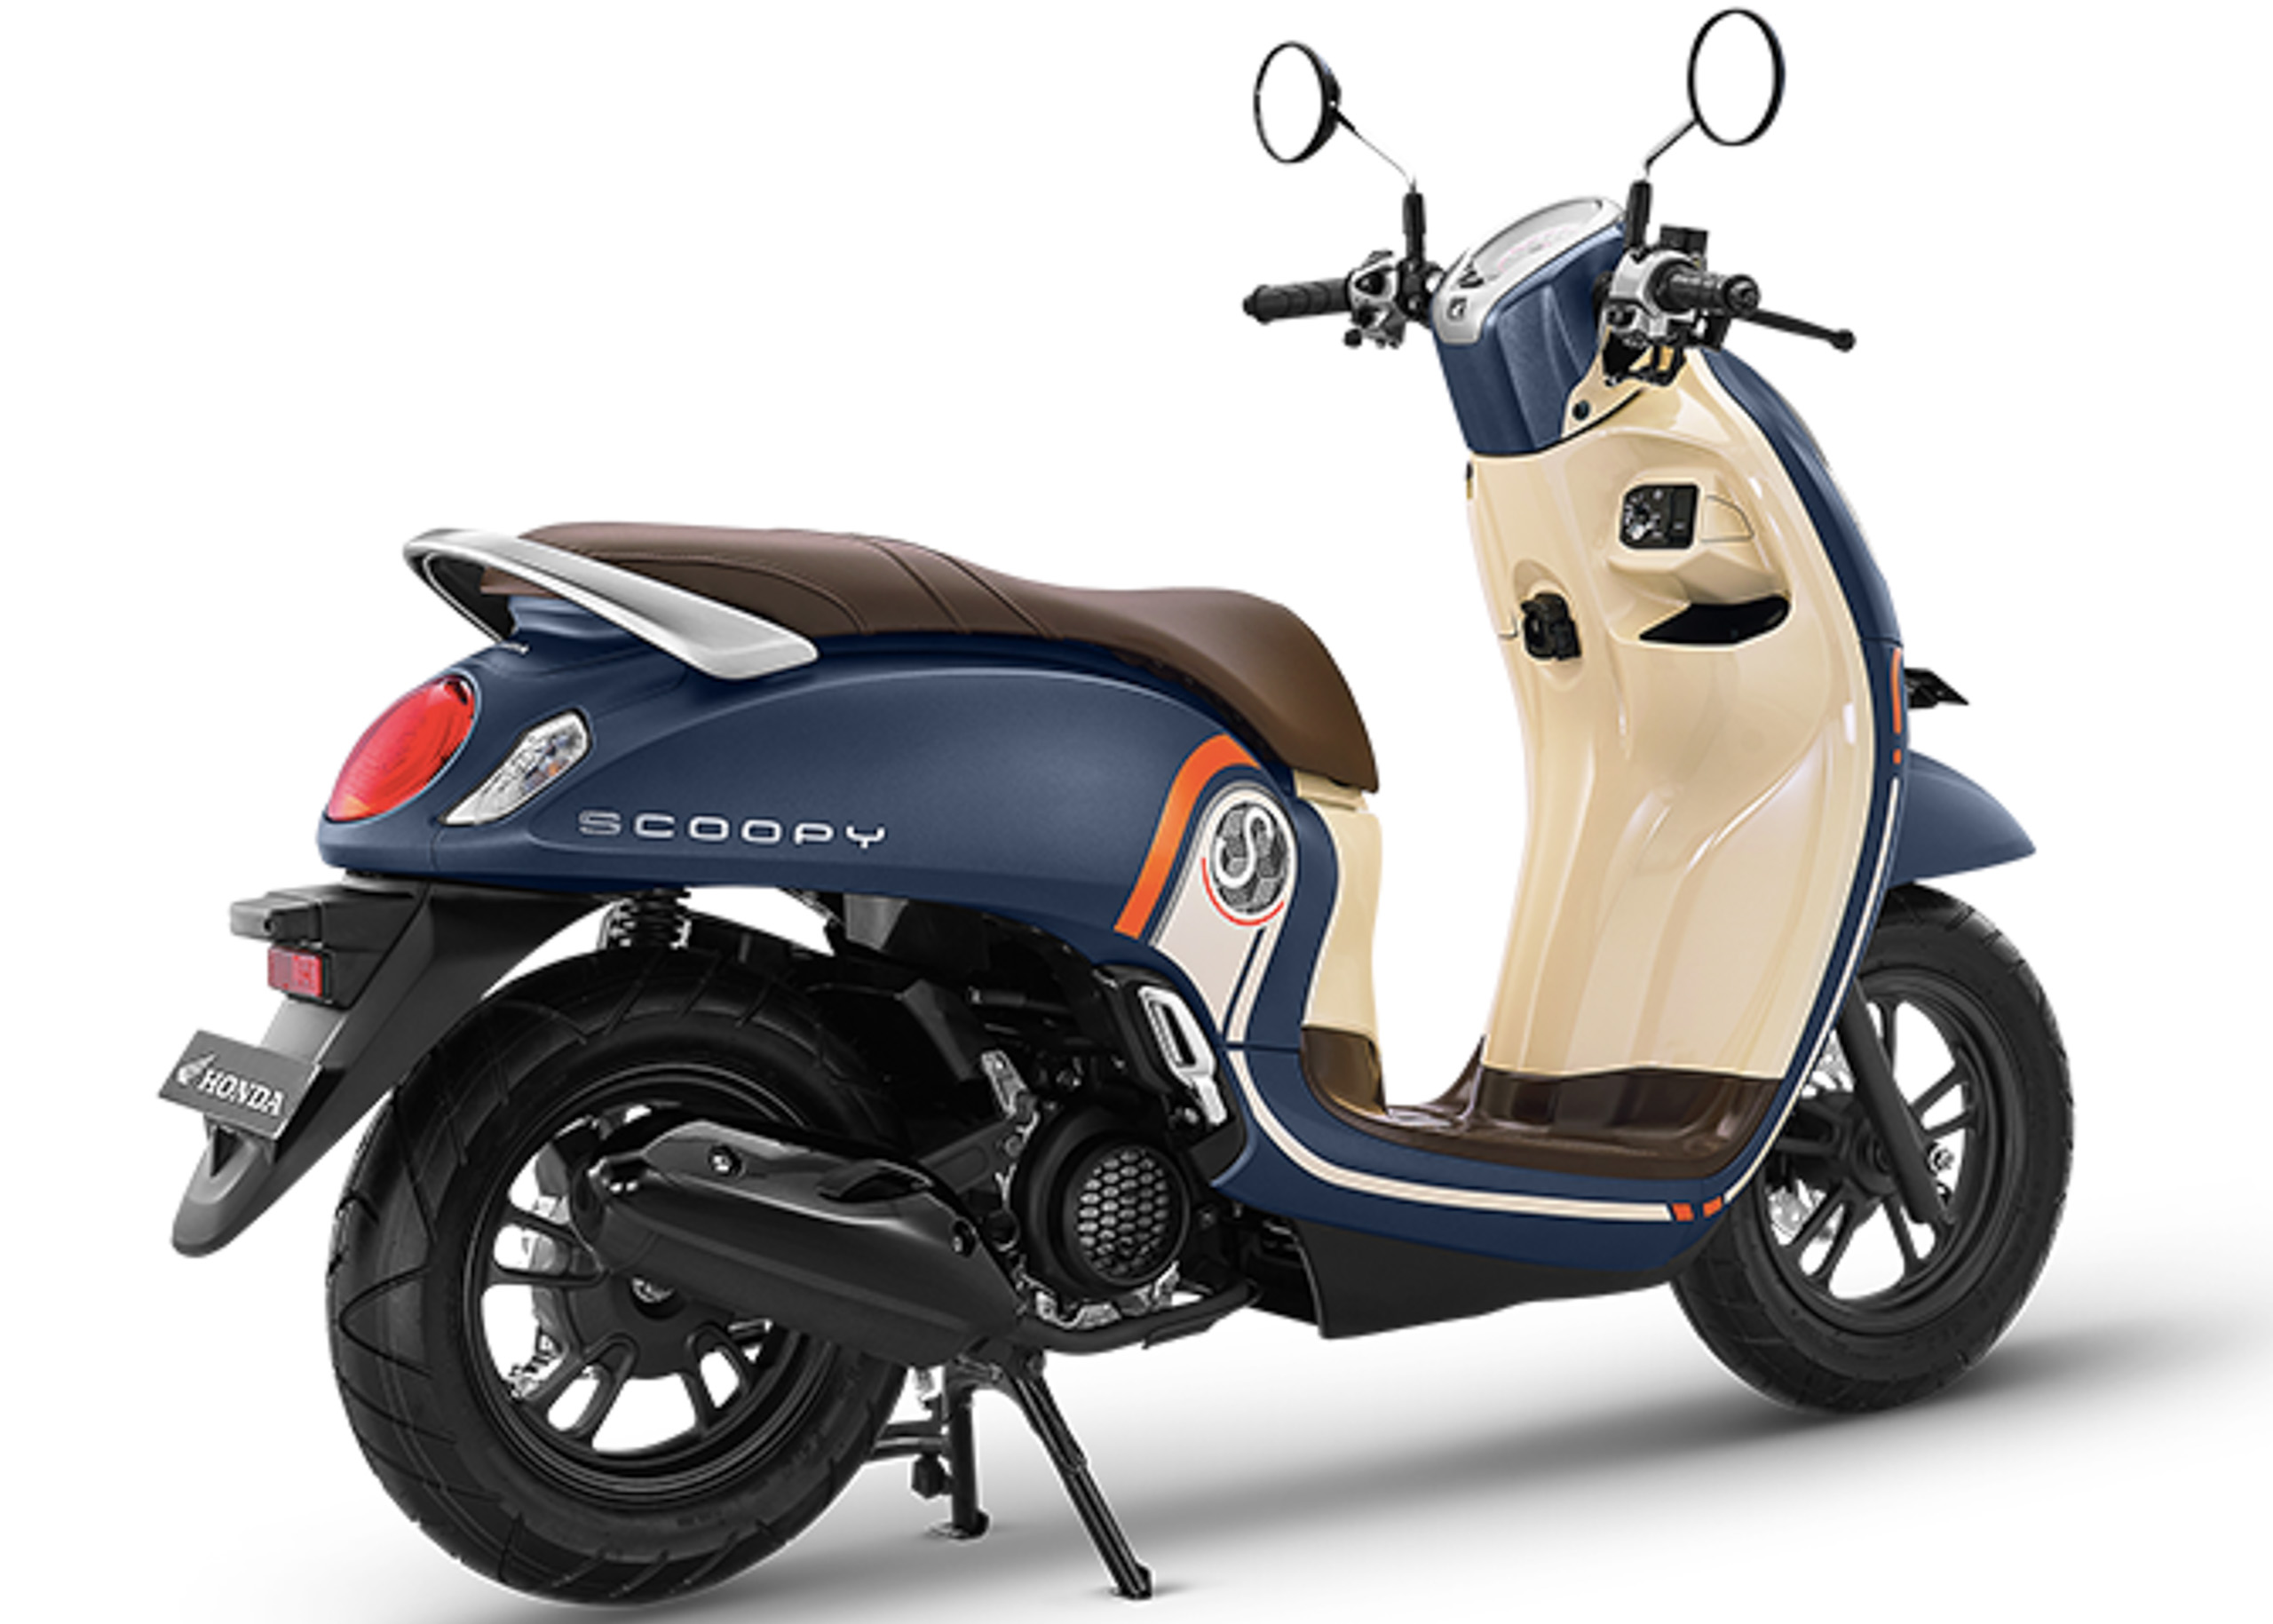 How Much Is Honda Scoopy In The Philippines